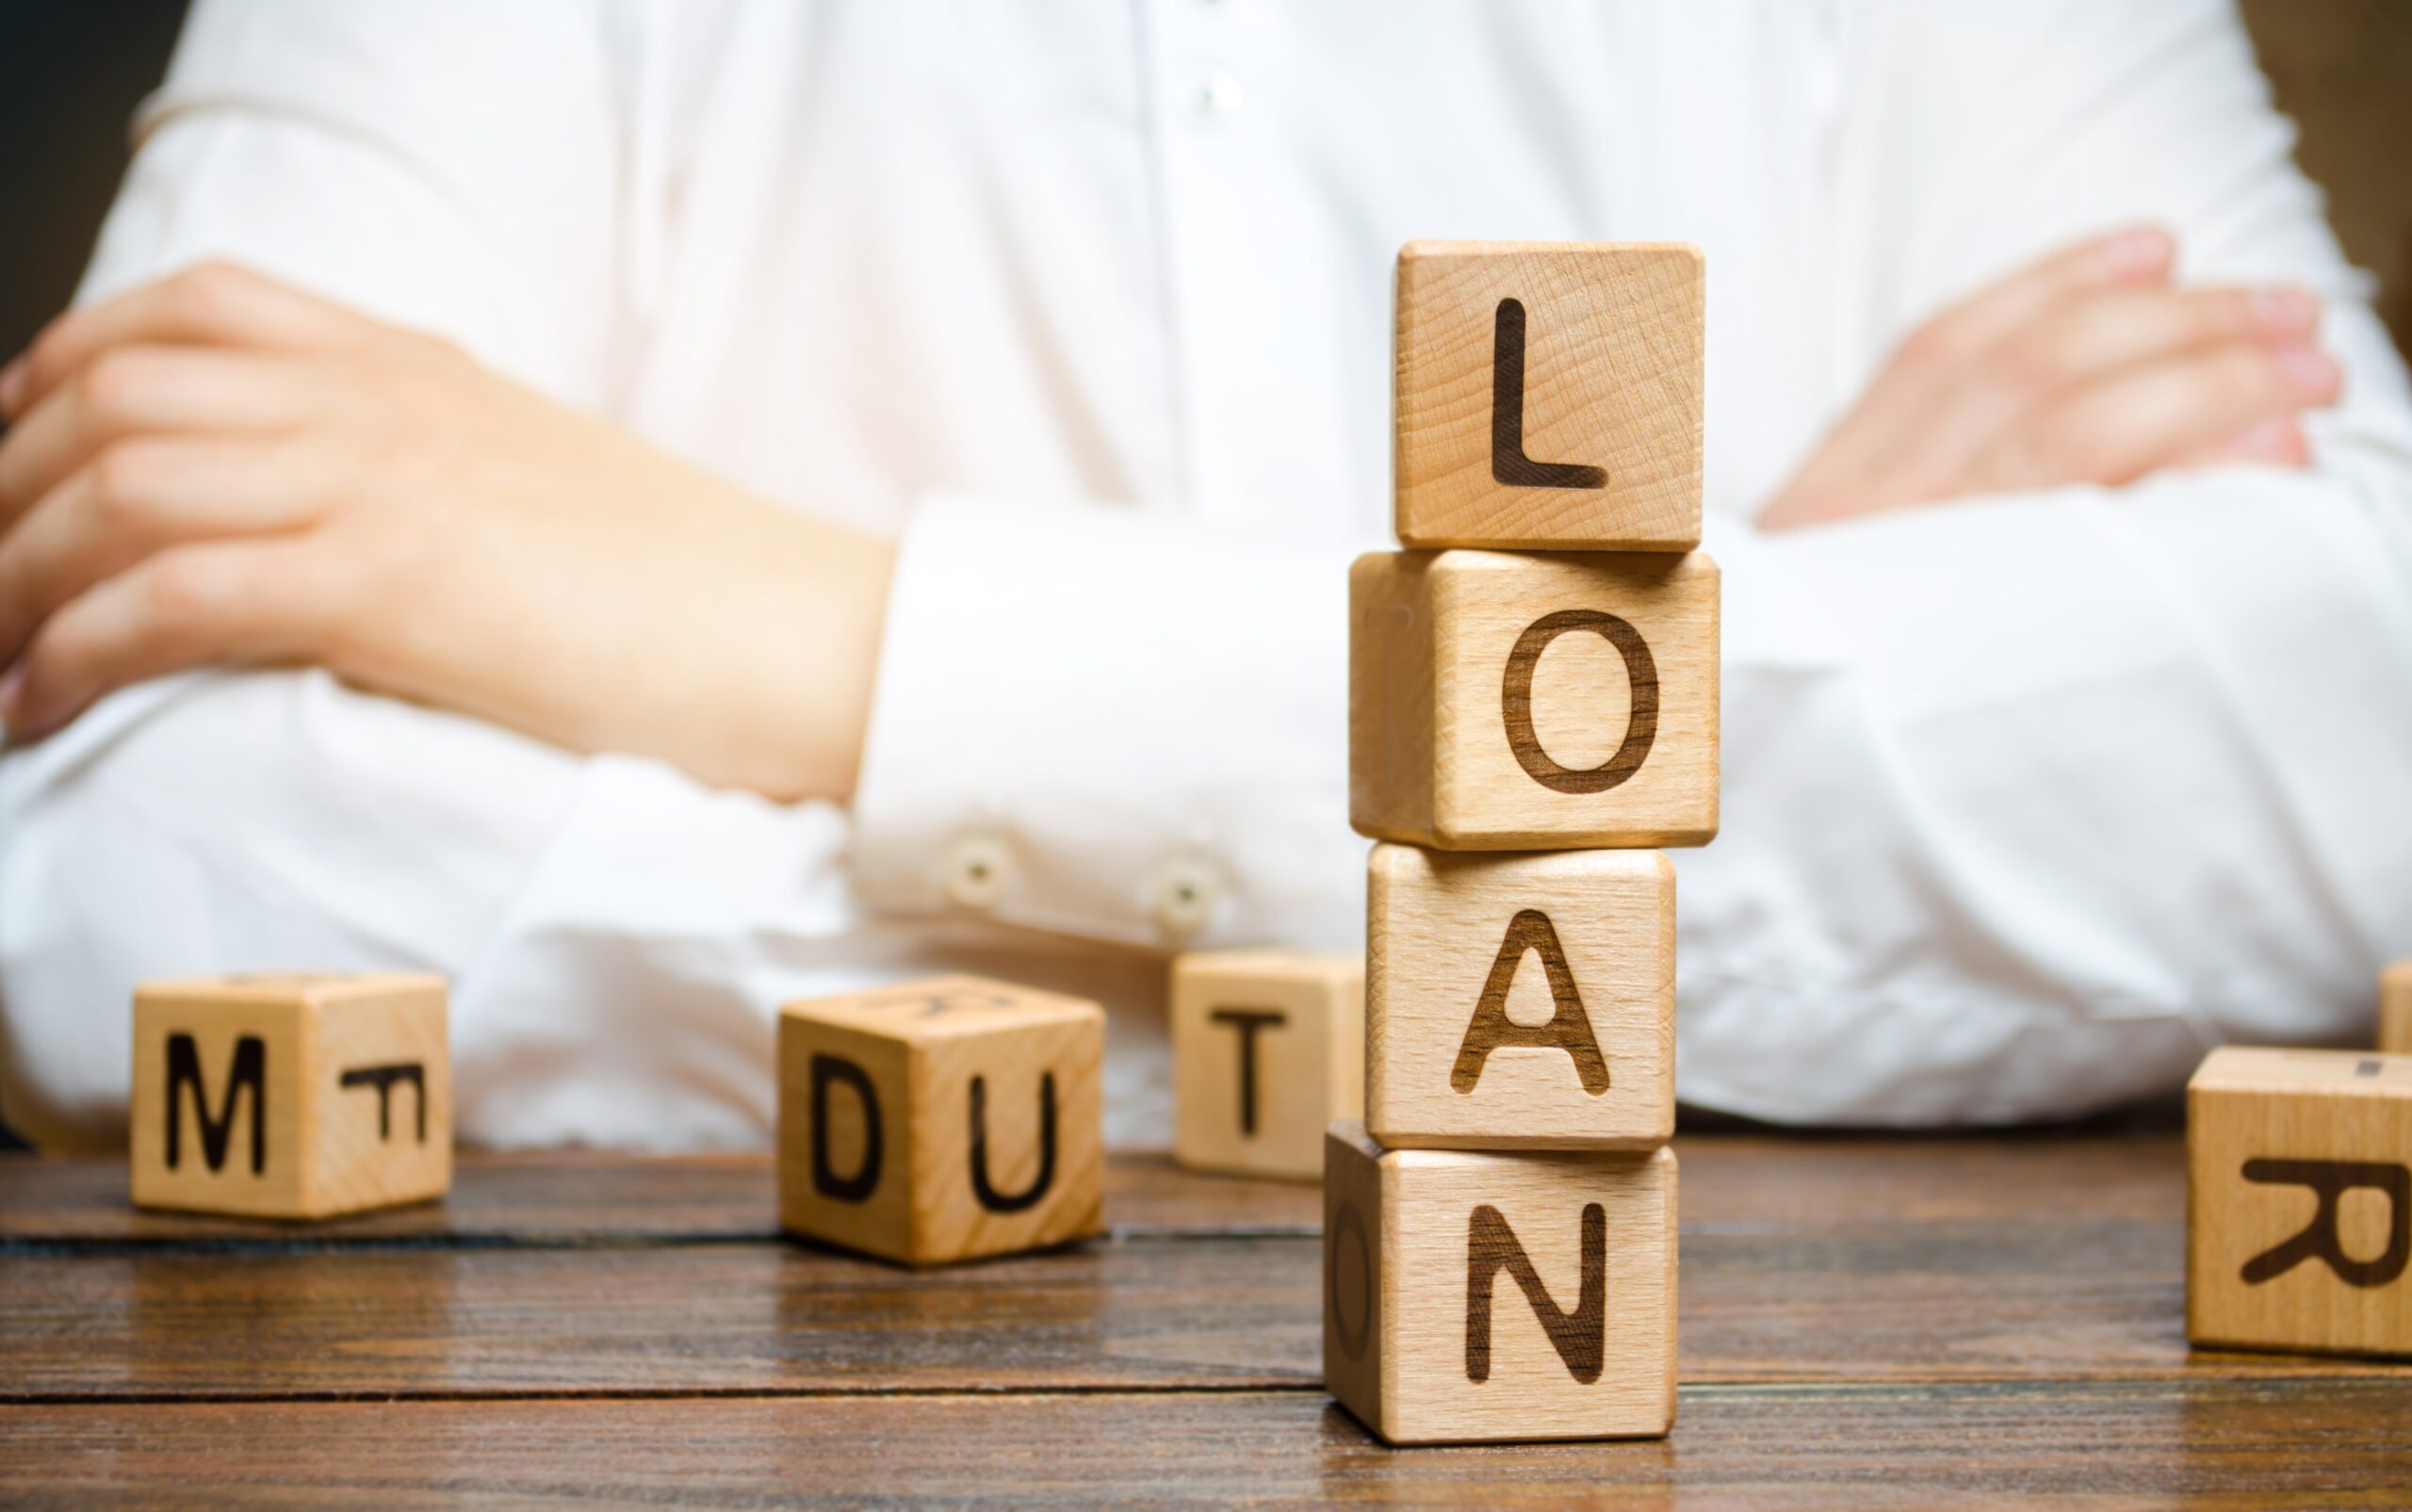 “Is Press Loans Legit?” – Find out if these short-term loans are the right solution for you!